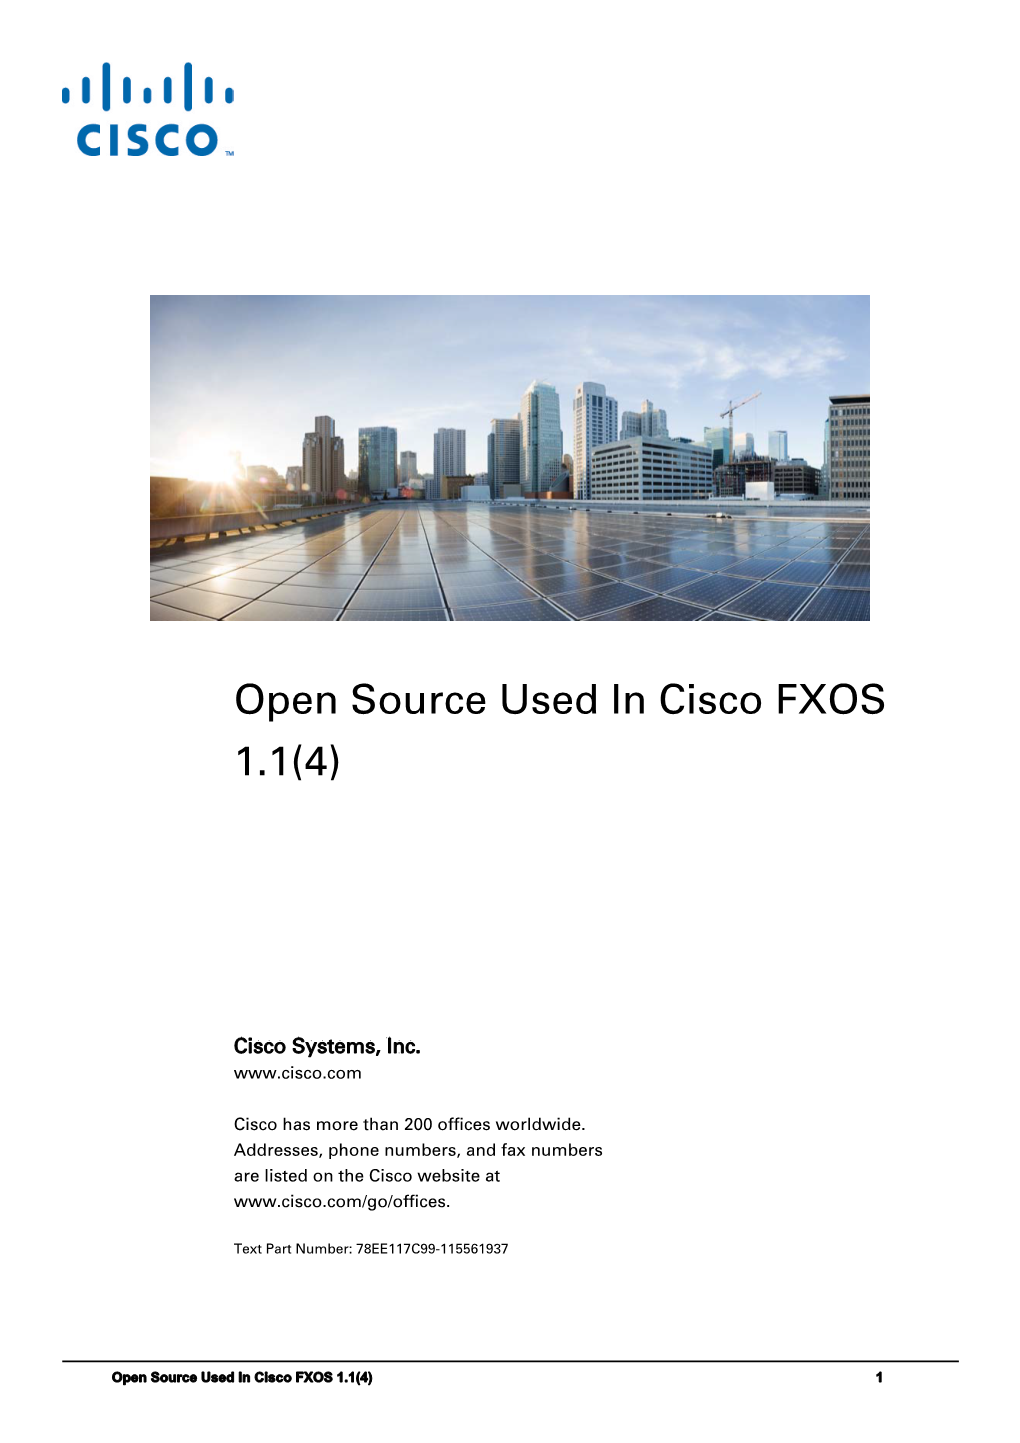 Open Source Used in Cisco FXOS 1.1(4)